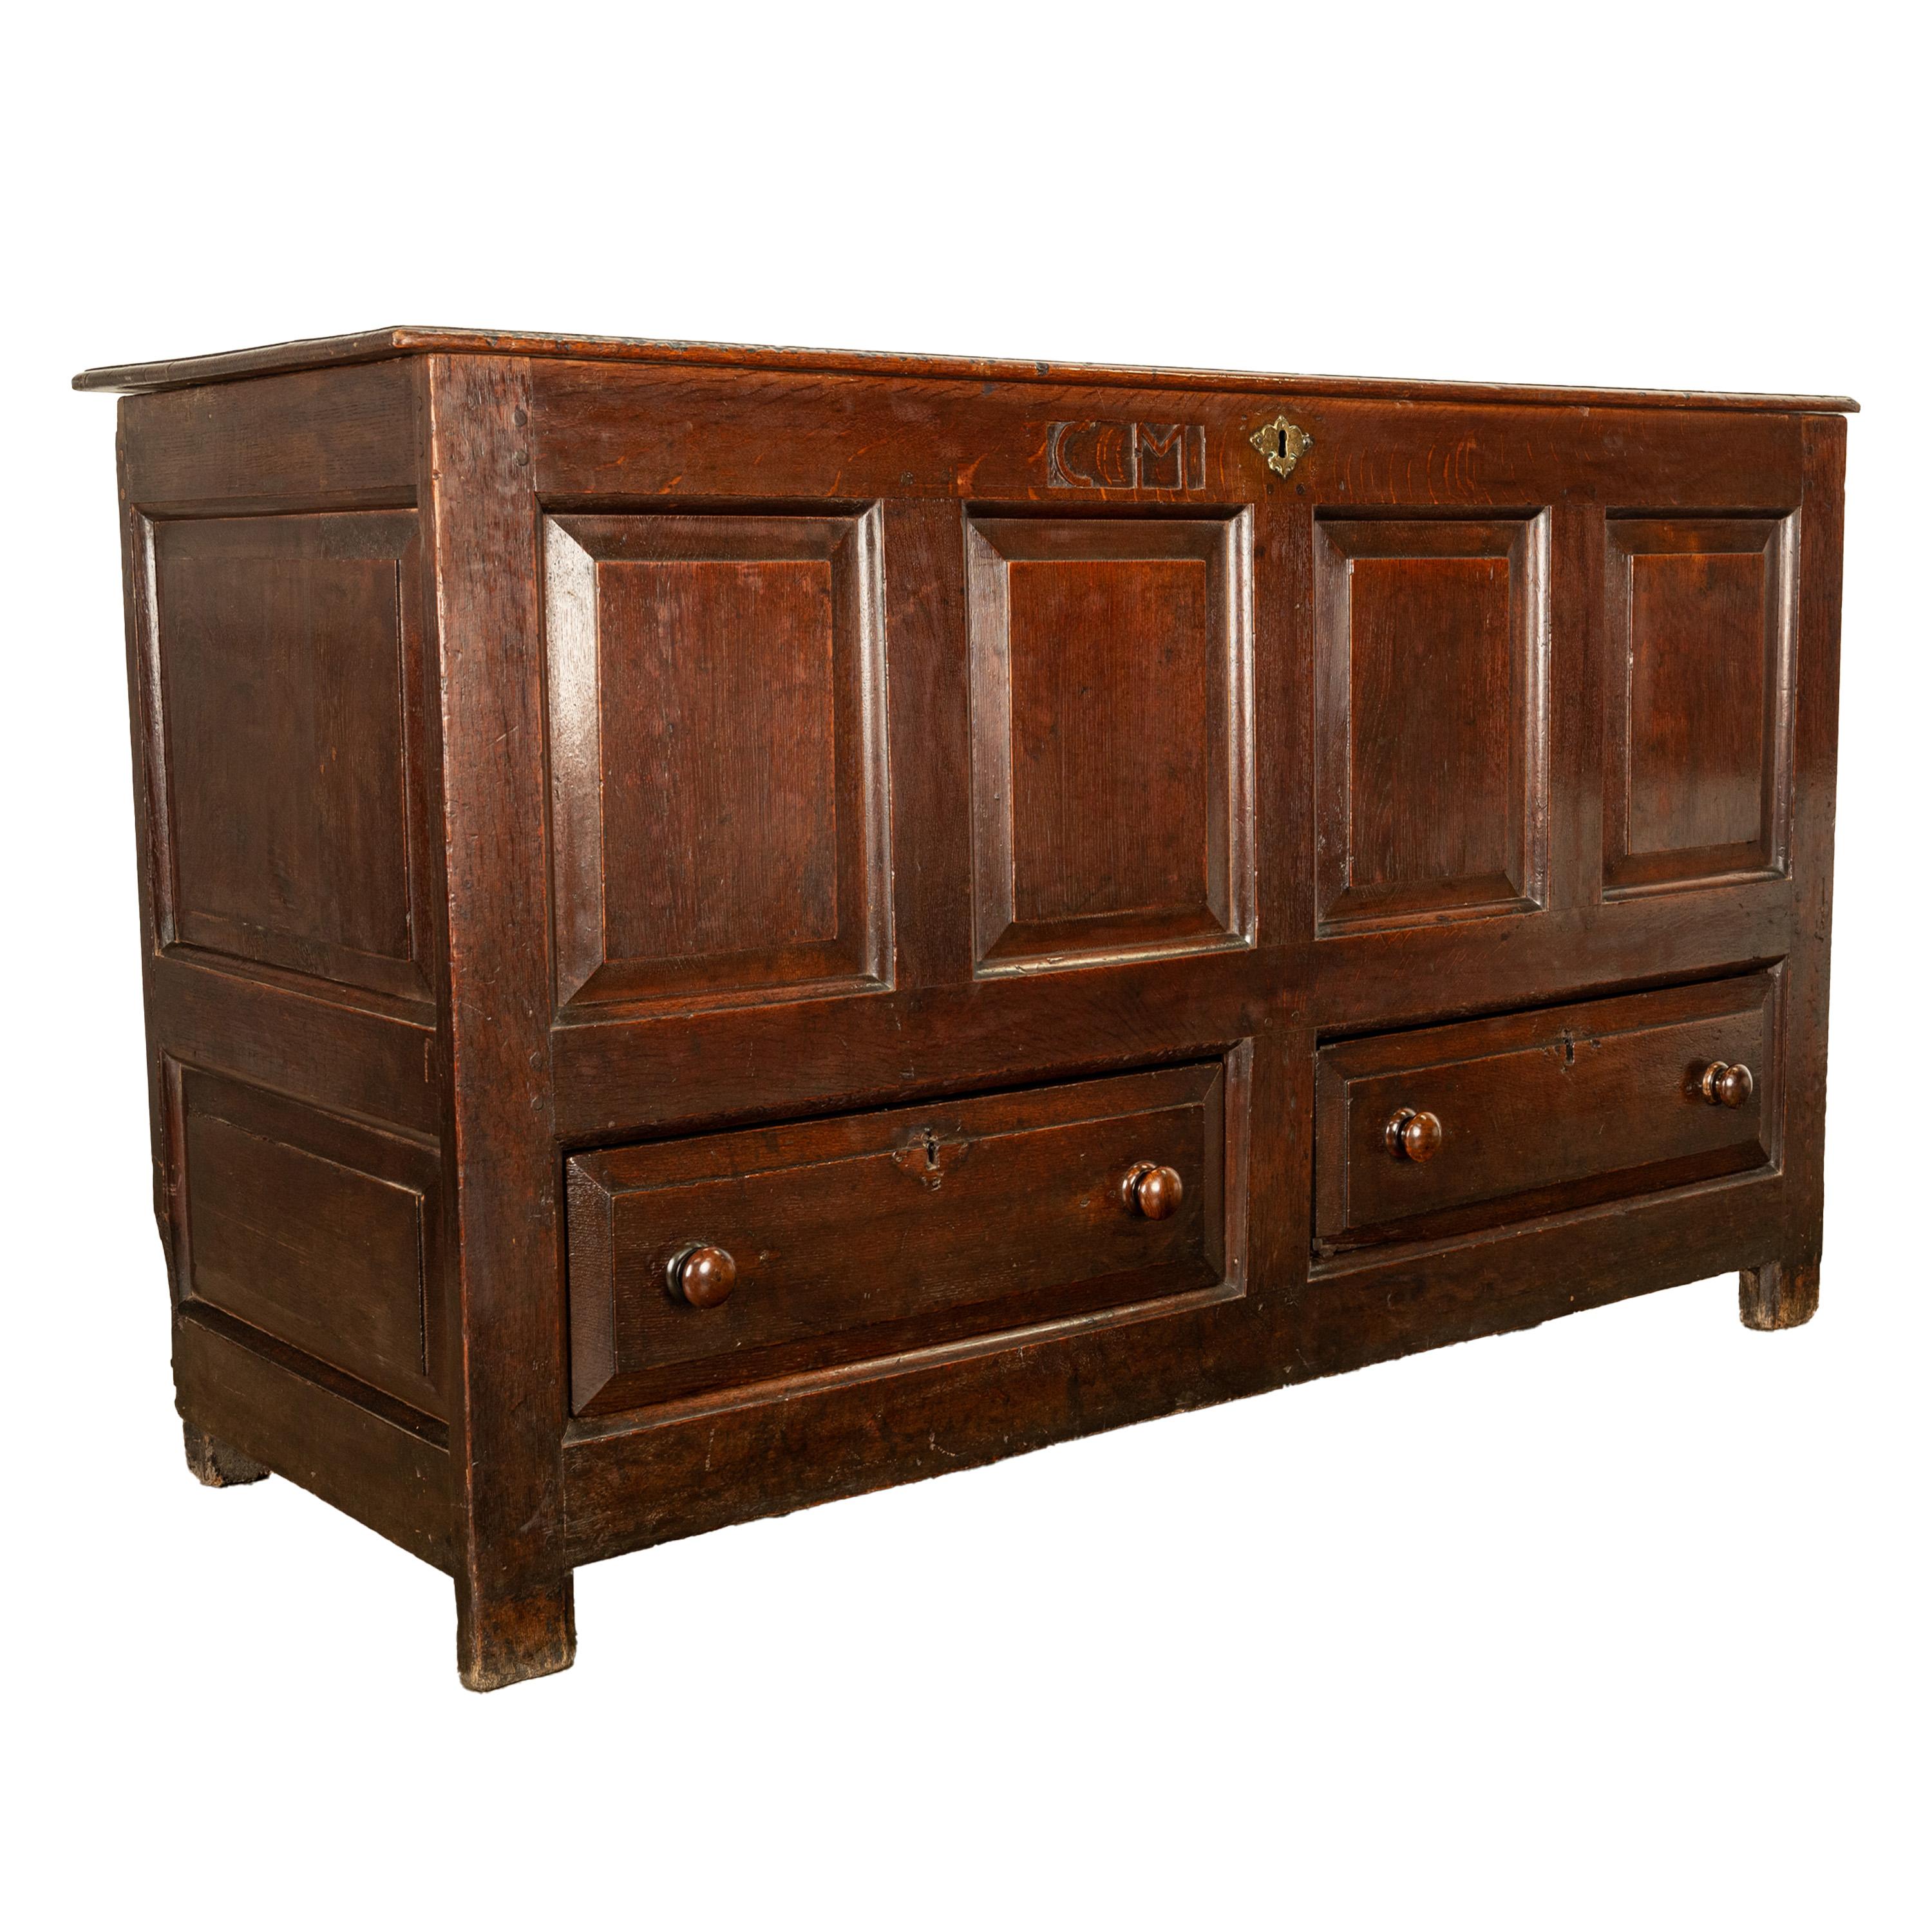 Monumental Antique Georgian Joined Oak Mule Dowry Chest Coffer Yorkshire 1720 For Sale 4